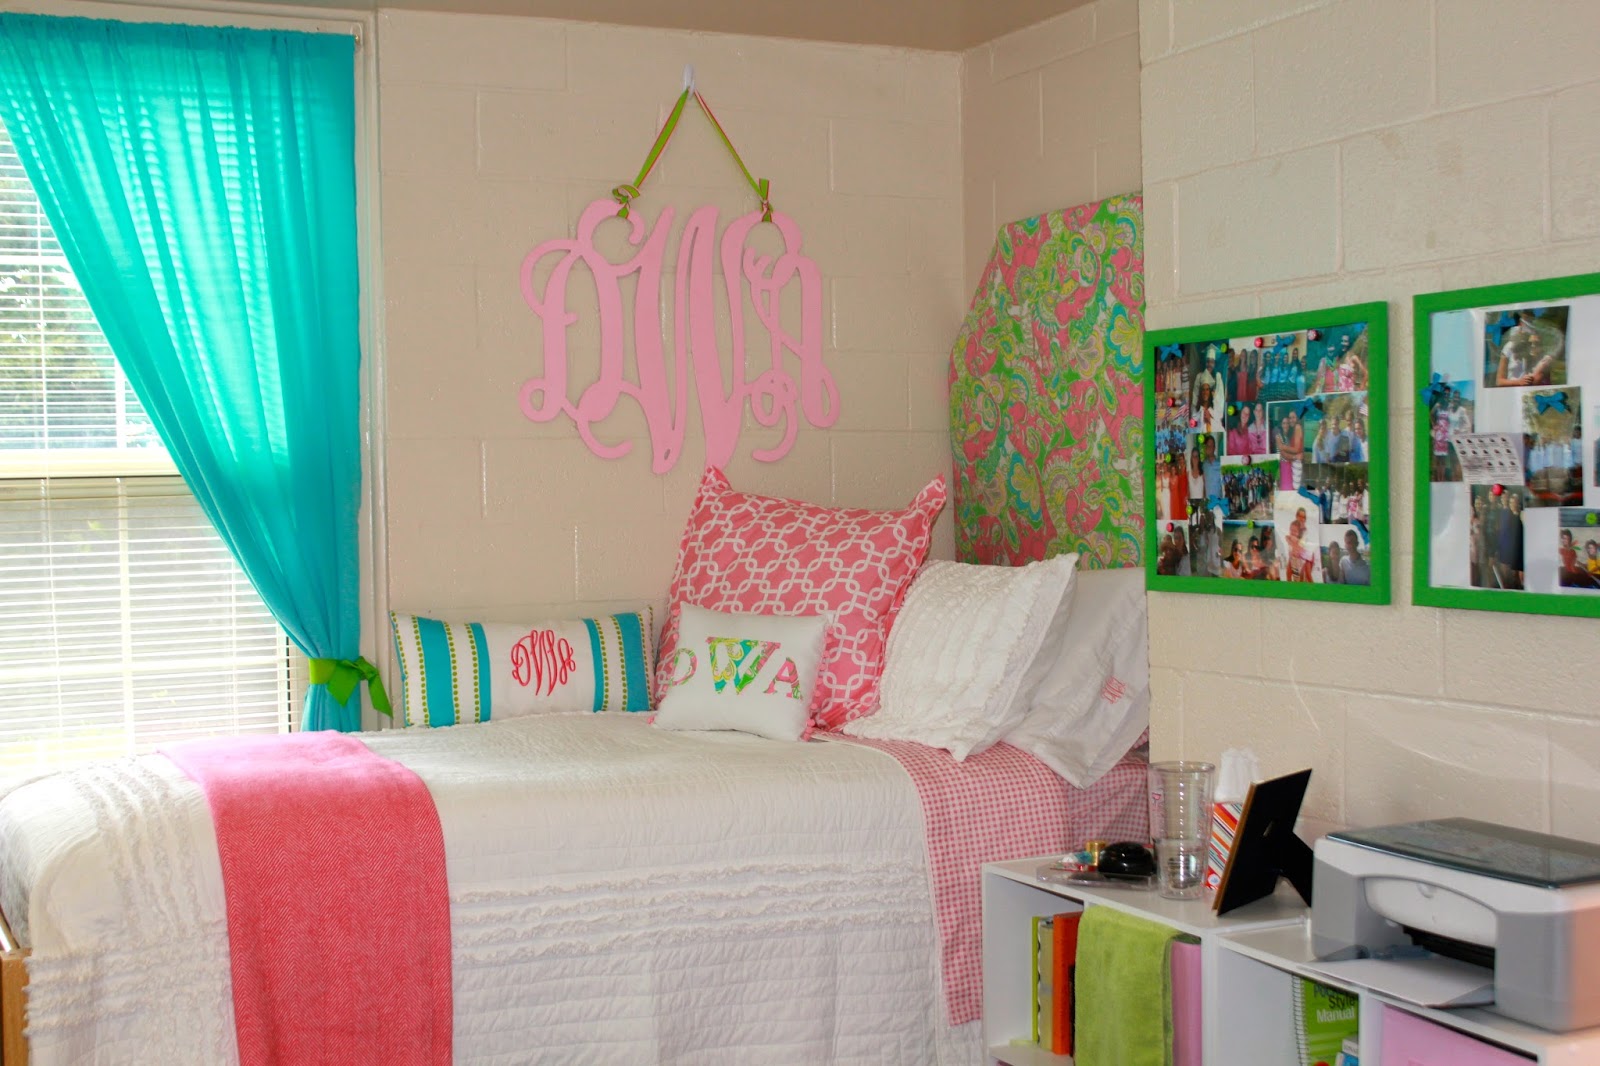 Prep In Your Step: My Dorm Room